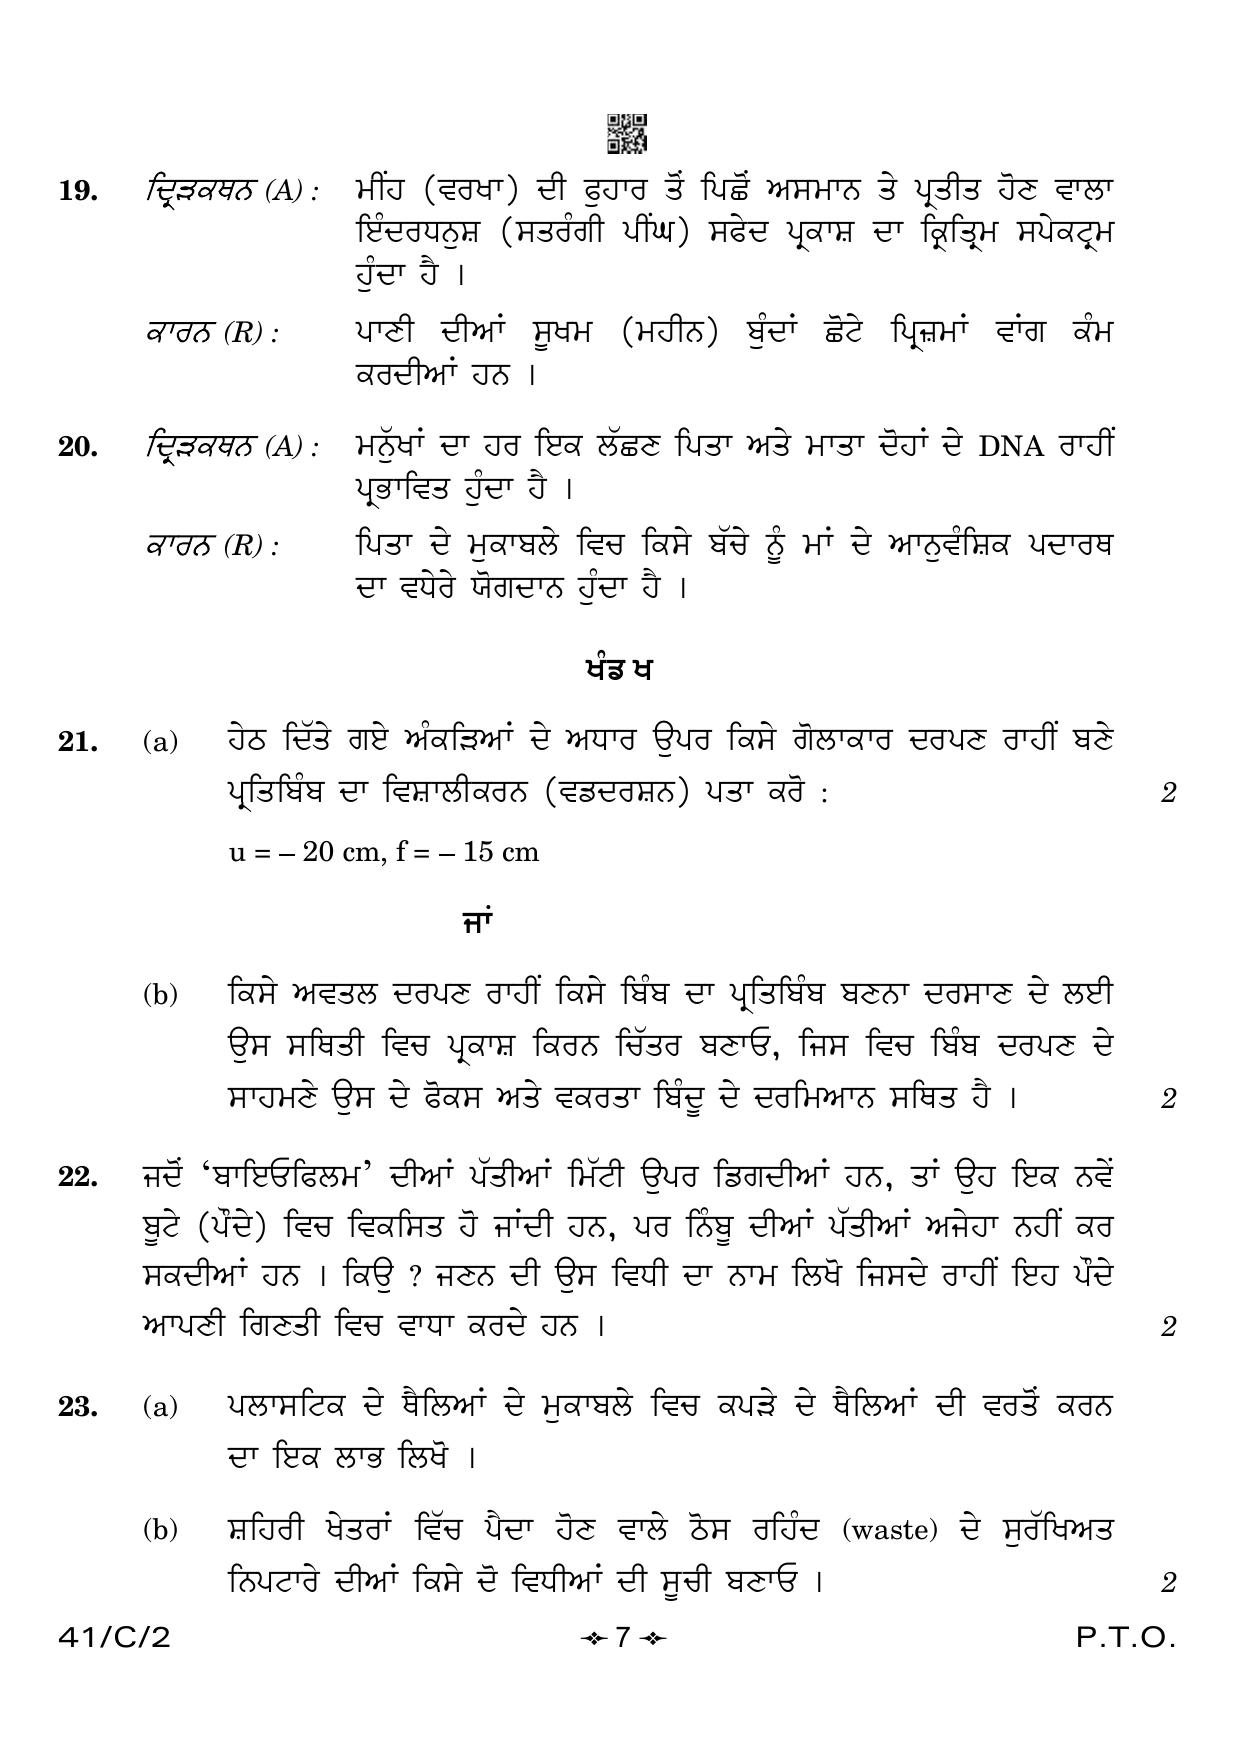 CBSE Class 10 41-2 Science Punjabi 2023 (Compartment) Question Paper - Page 7